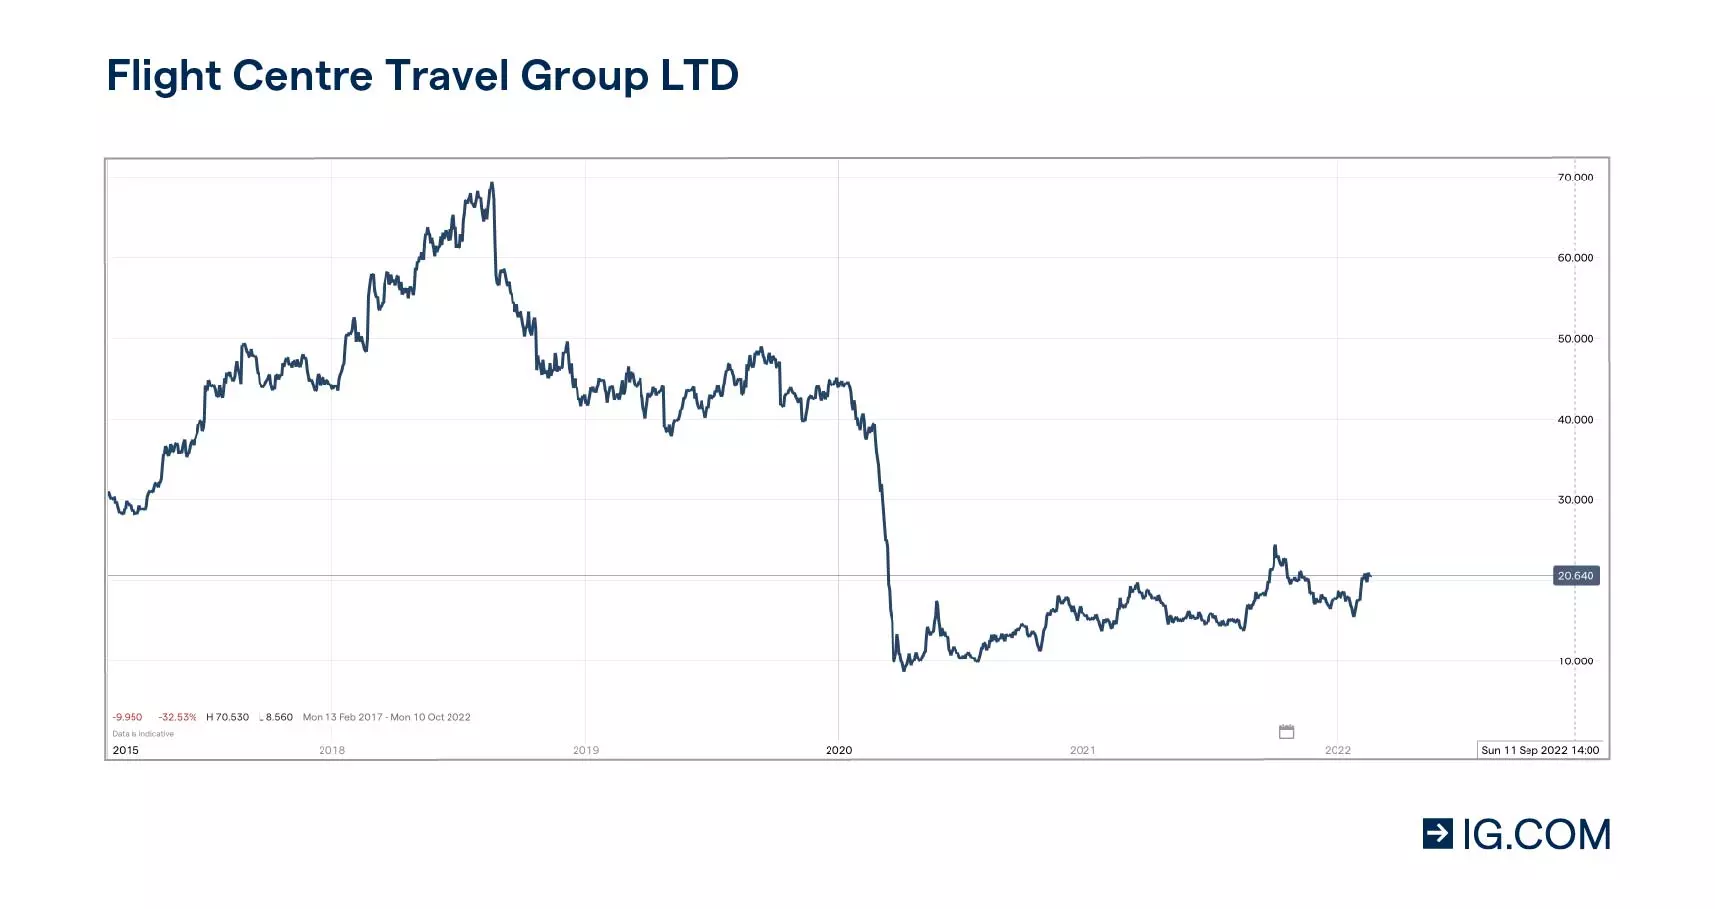 Flight Centre price chart showing the share price steadily increase from $30 in 2015 to $70 in Q3 FY18. then when the pandemic started in Q1 FY20 it spiralled down to $8.50.